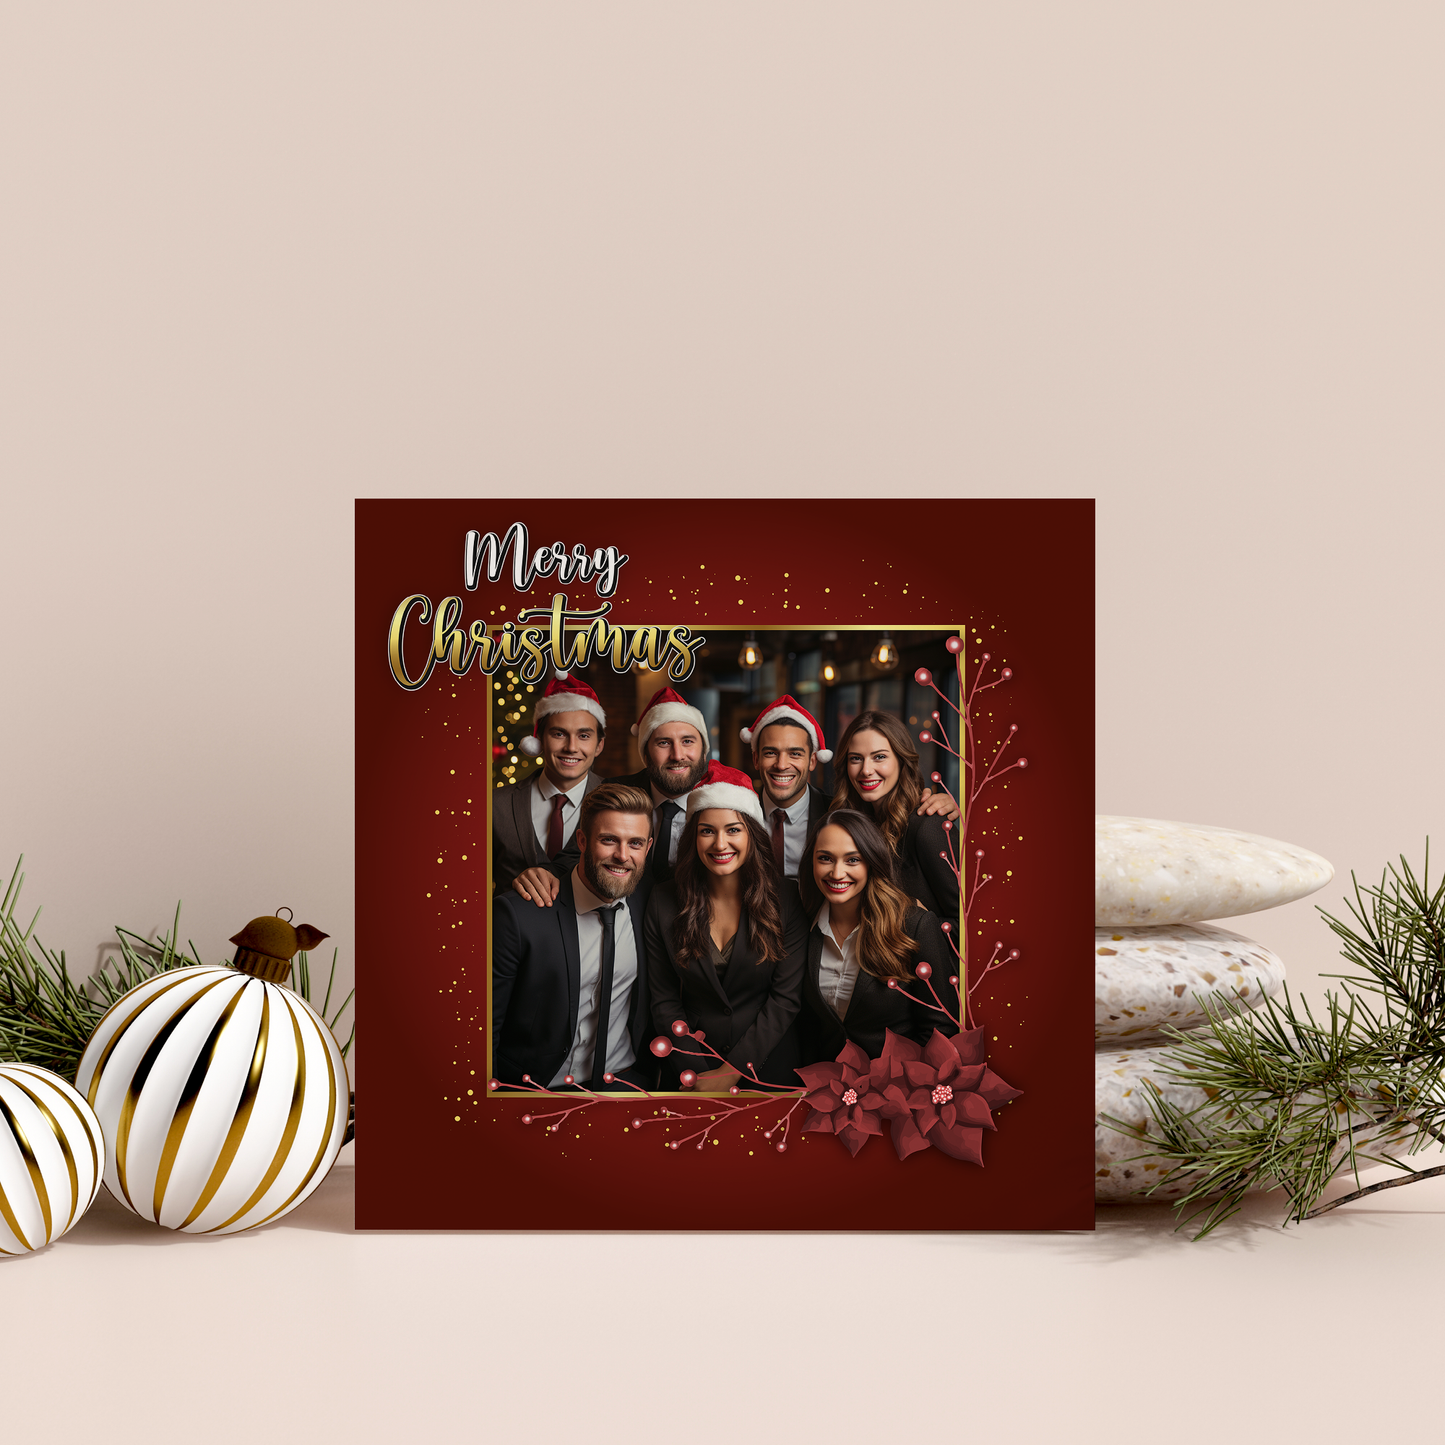 Customised Christmas Cards (Design Included)